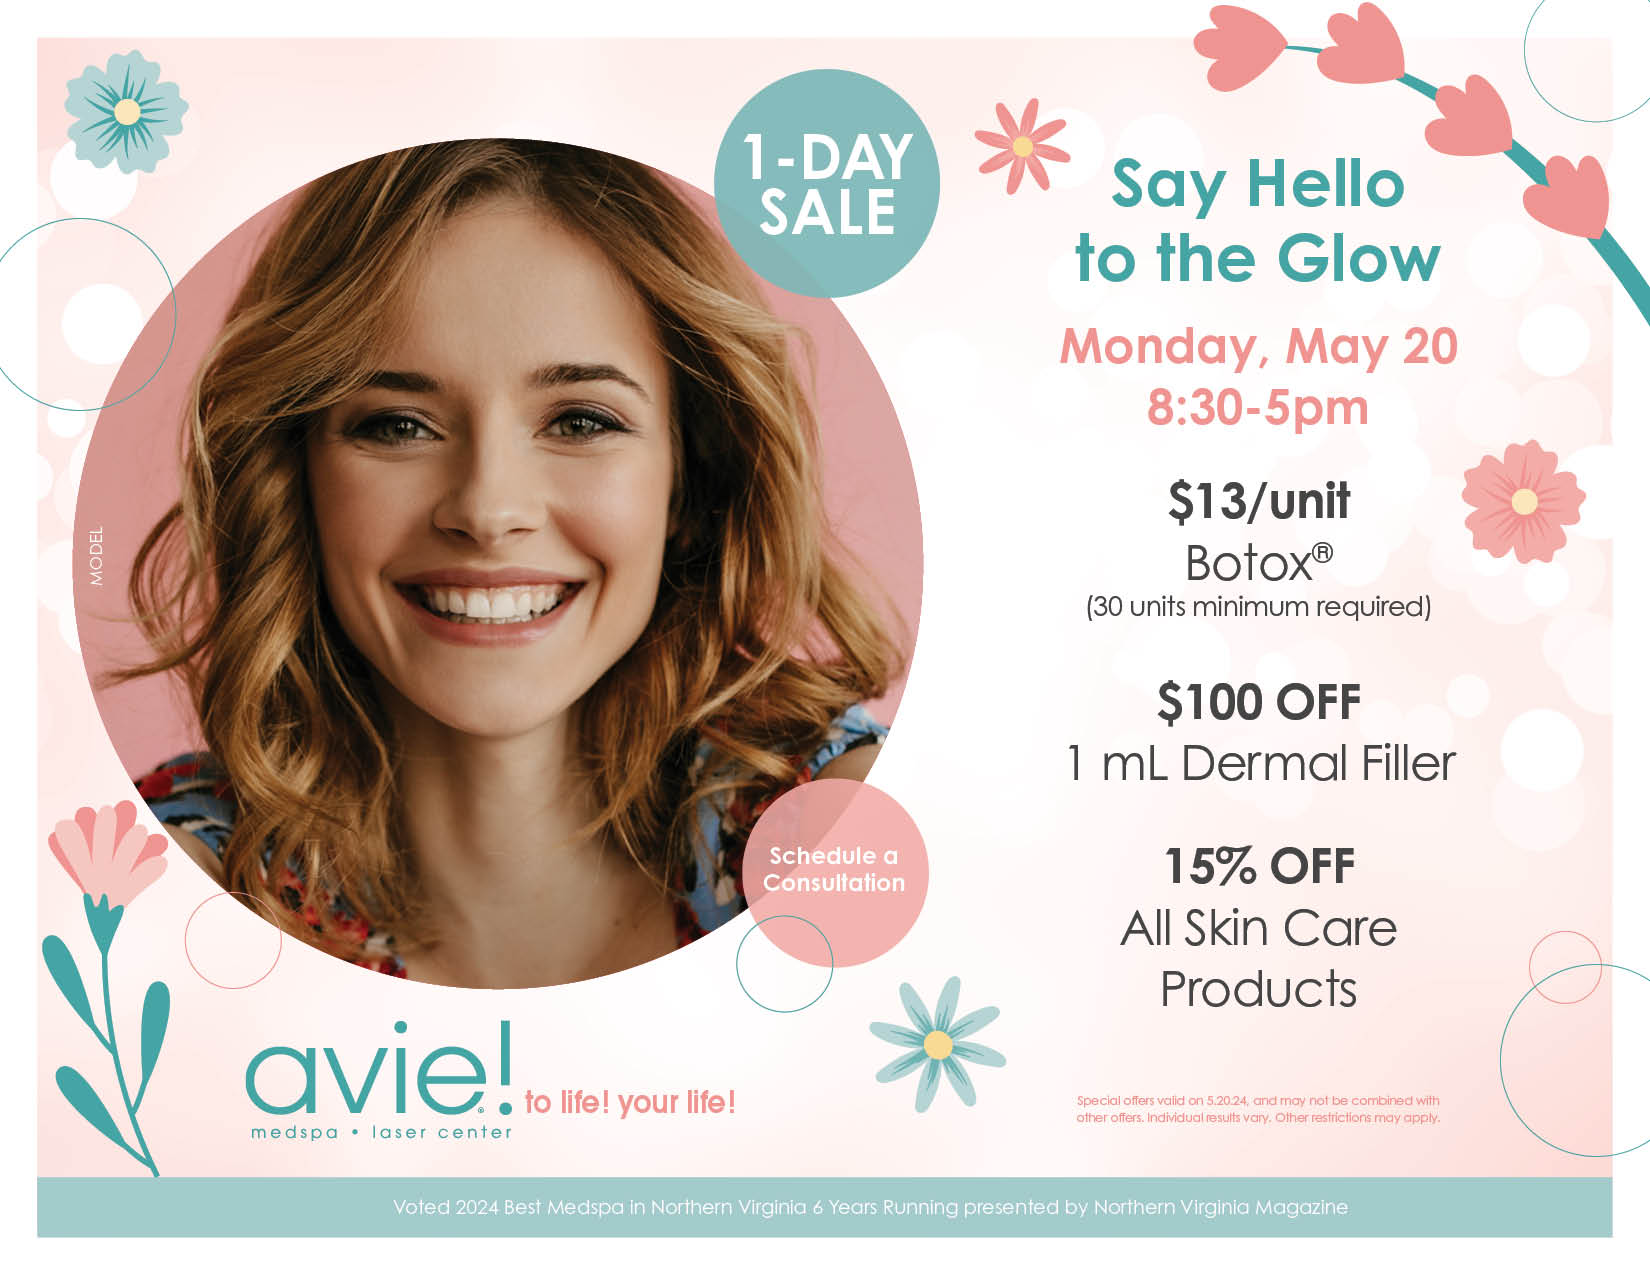 Say Hello to the Glow Monday, May 20 8:30-5pm $13/unit Botox® (30 units minimum required) $100 OFF 1 mL Dermal Filler 15% OFF All Skin Care Products